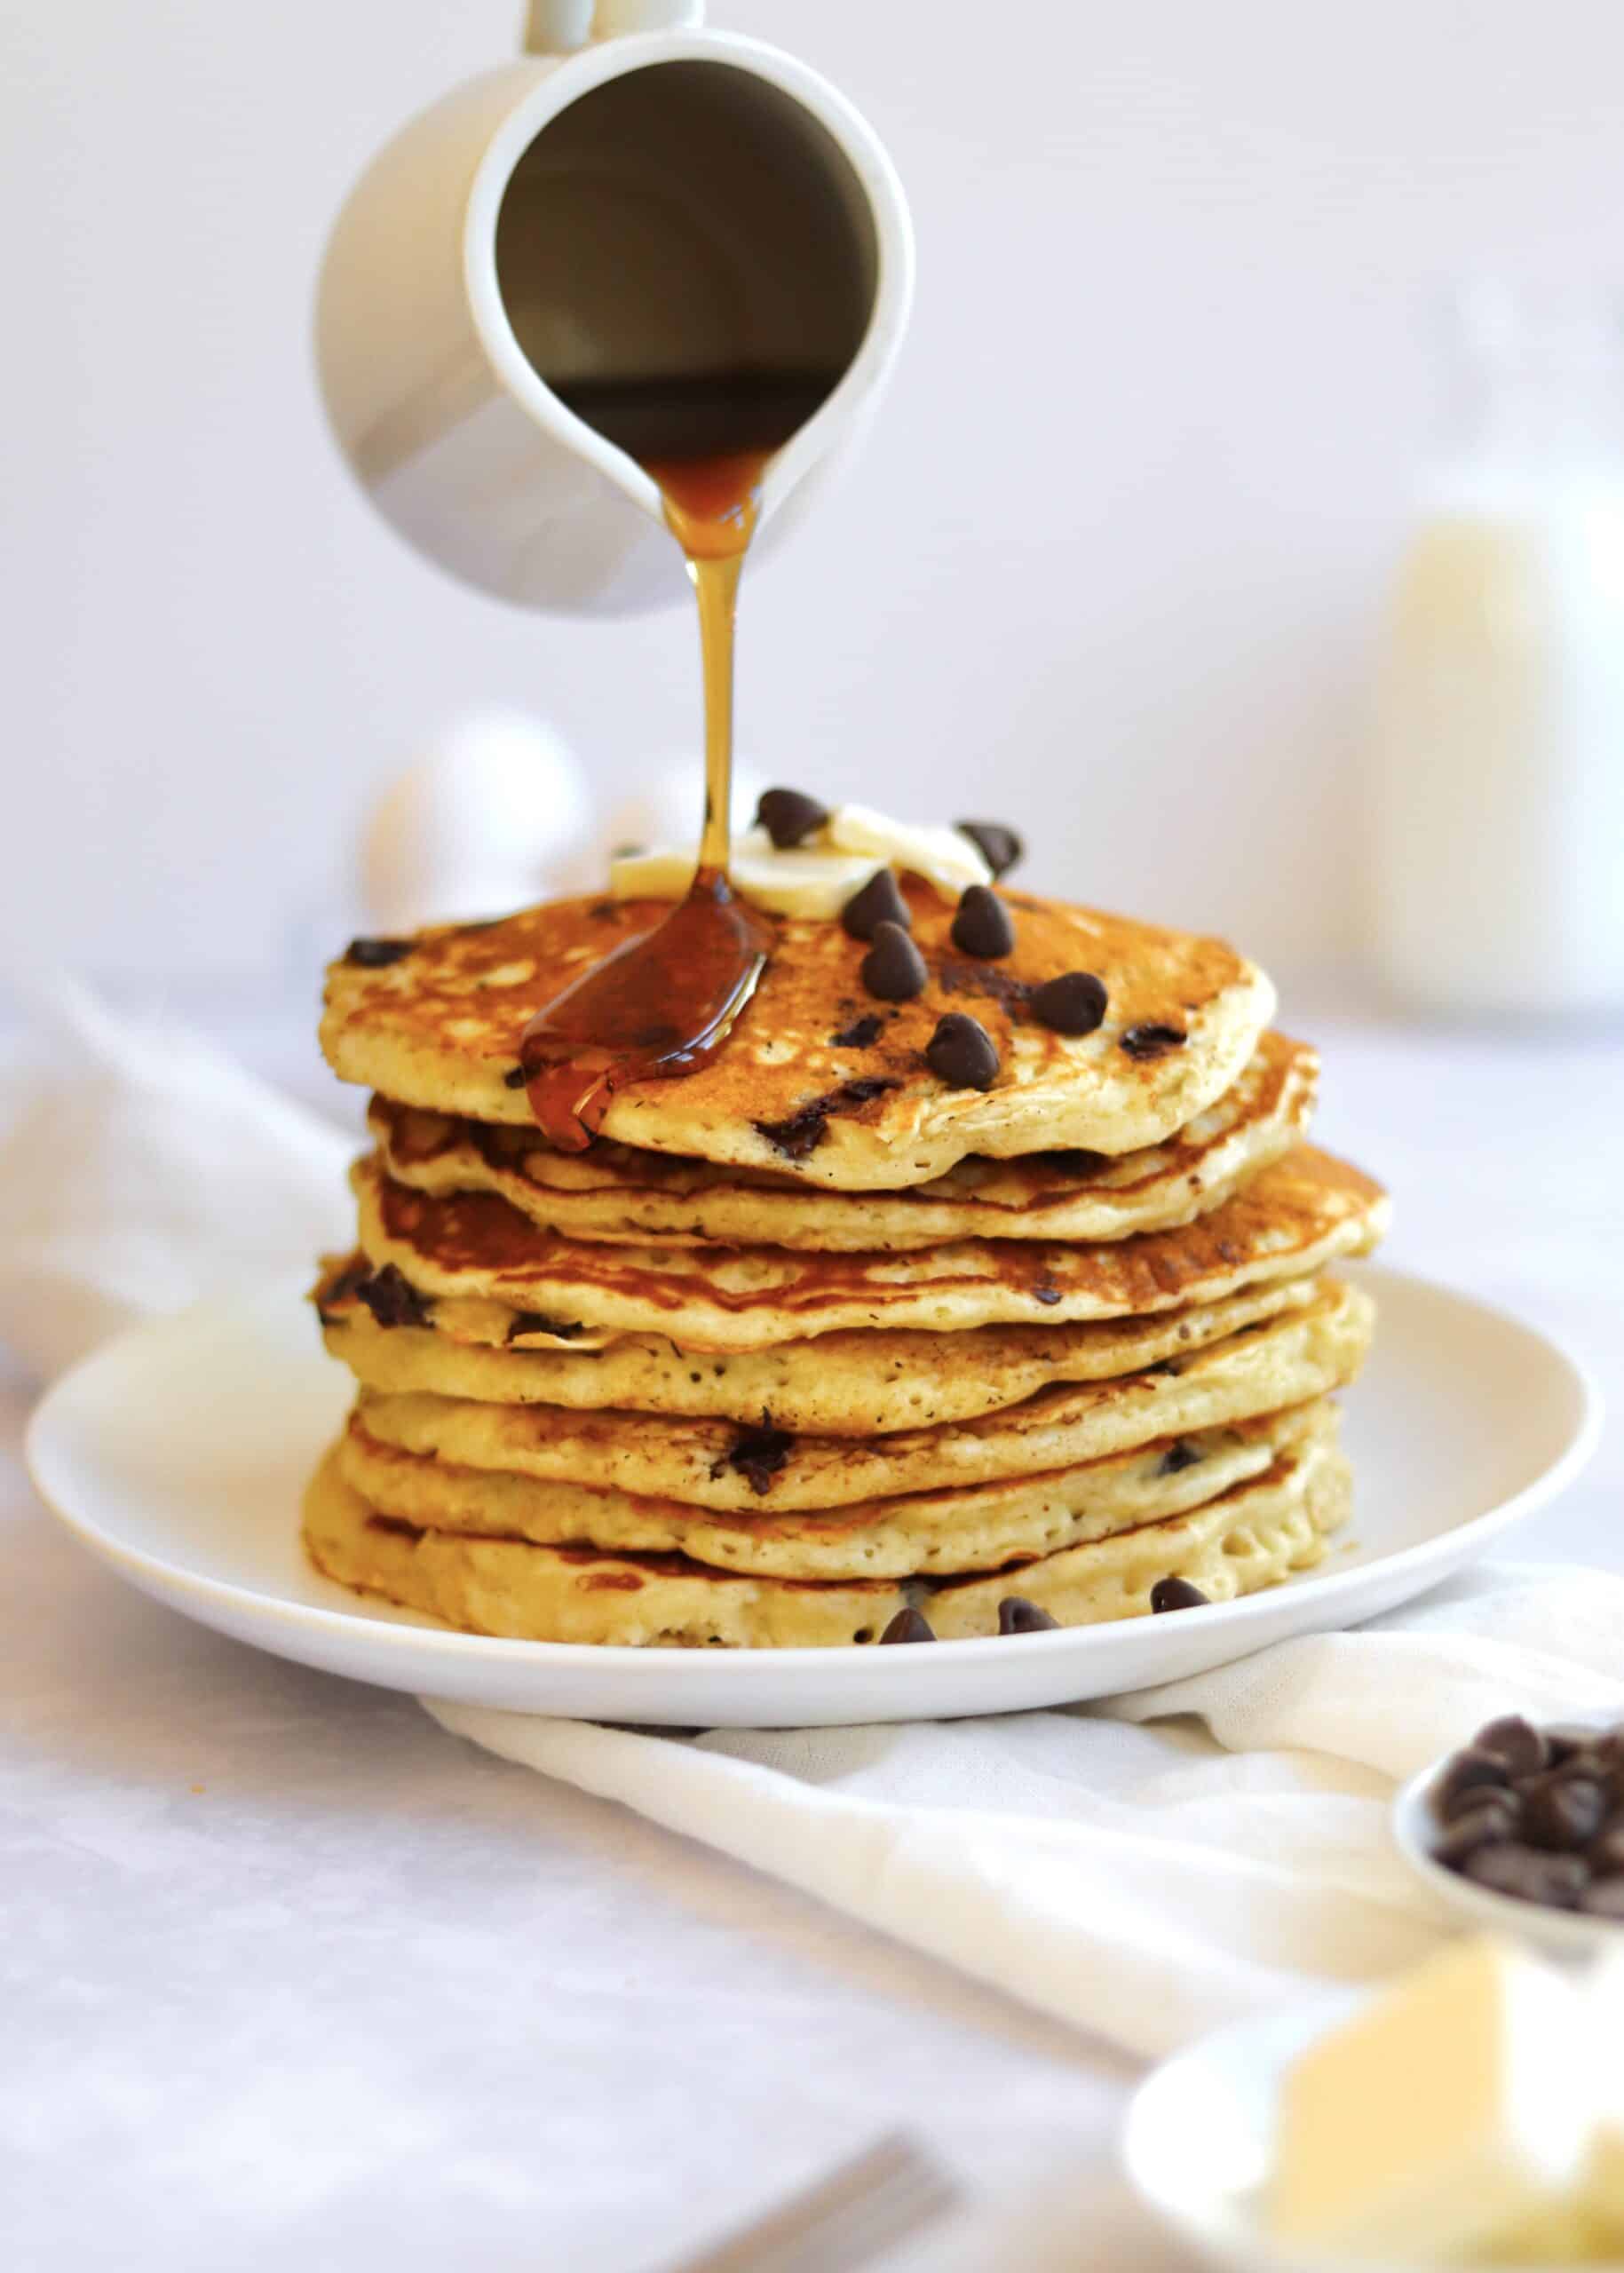 Maple Syrup being poured on chocolate chip pancakes